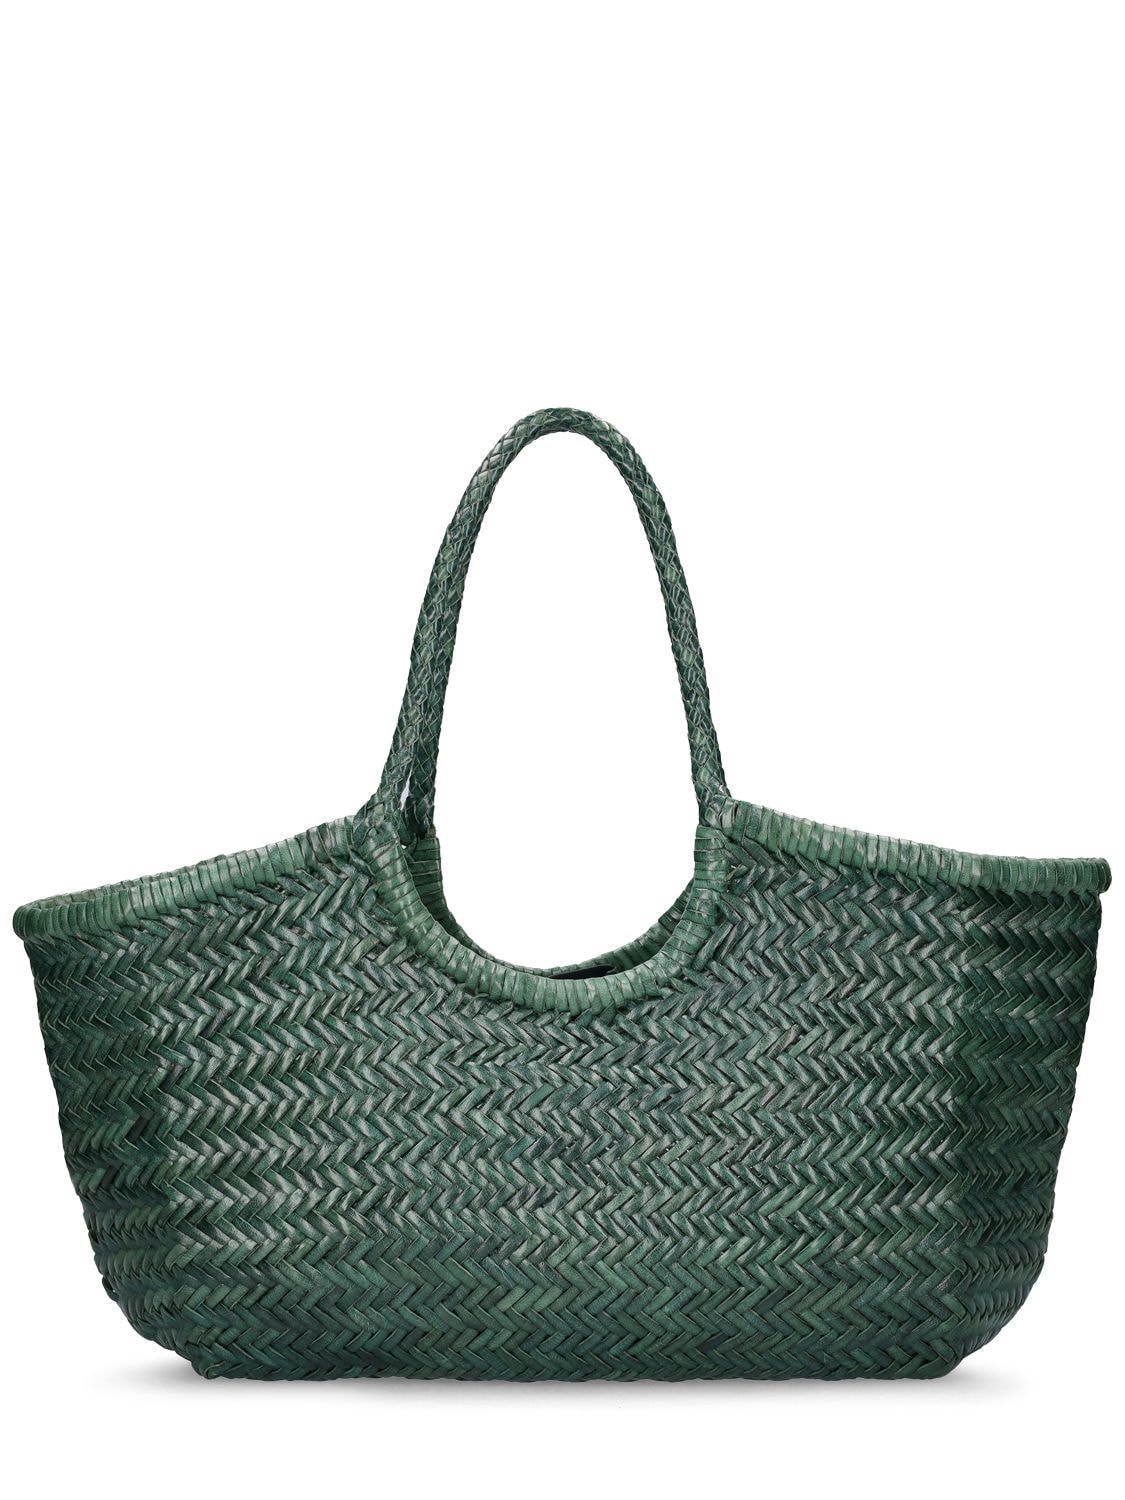 Dragon Diffusion Big Nantucket Woven Leather Basket Bag In Military Green